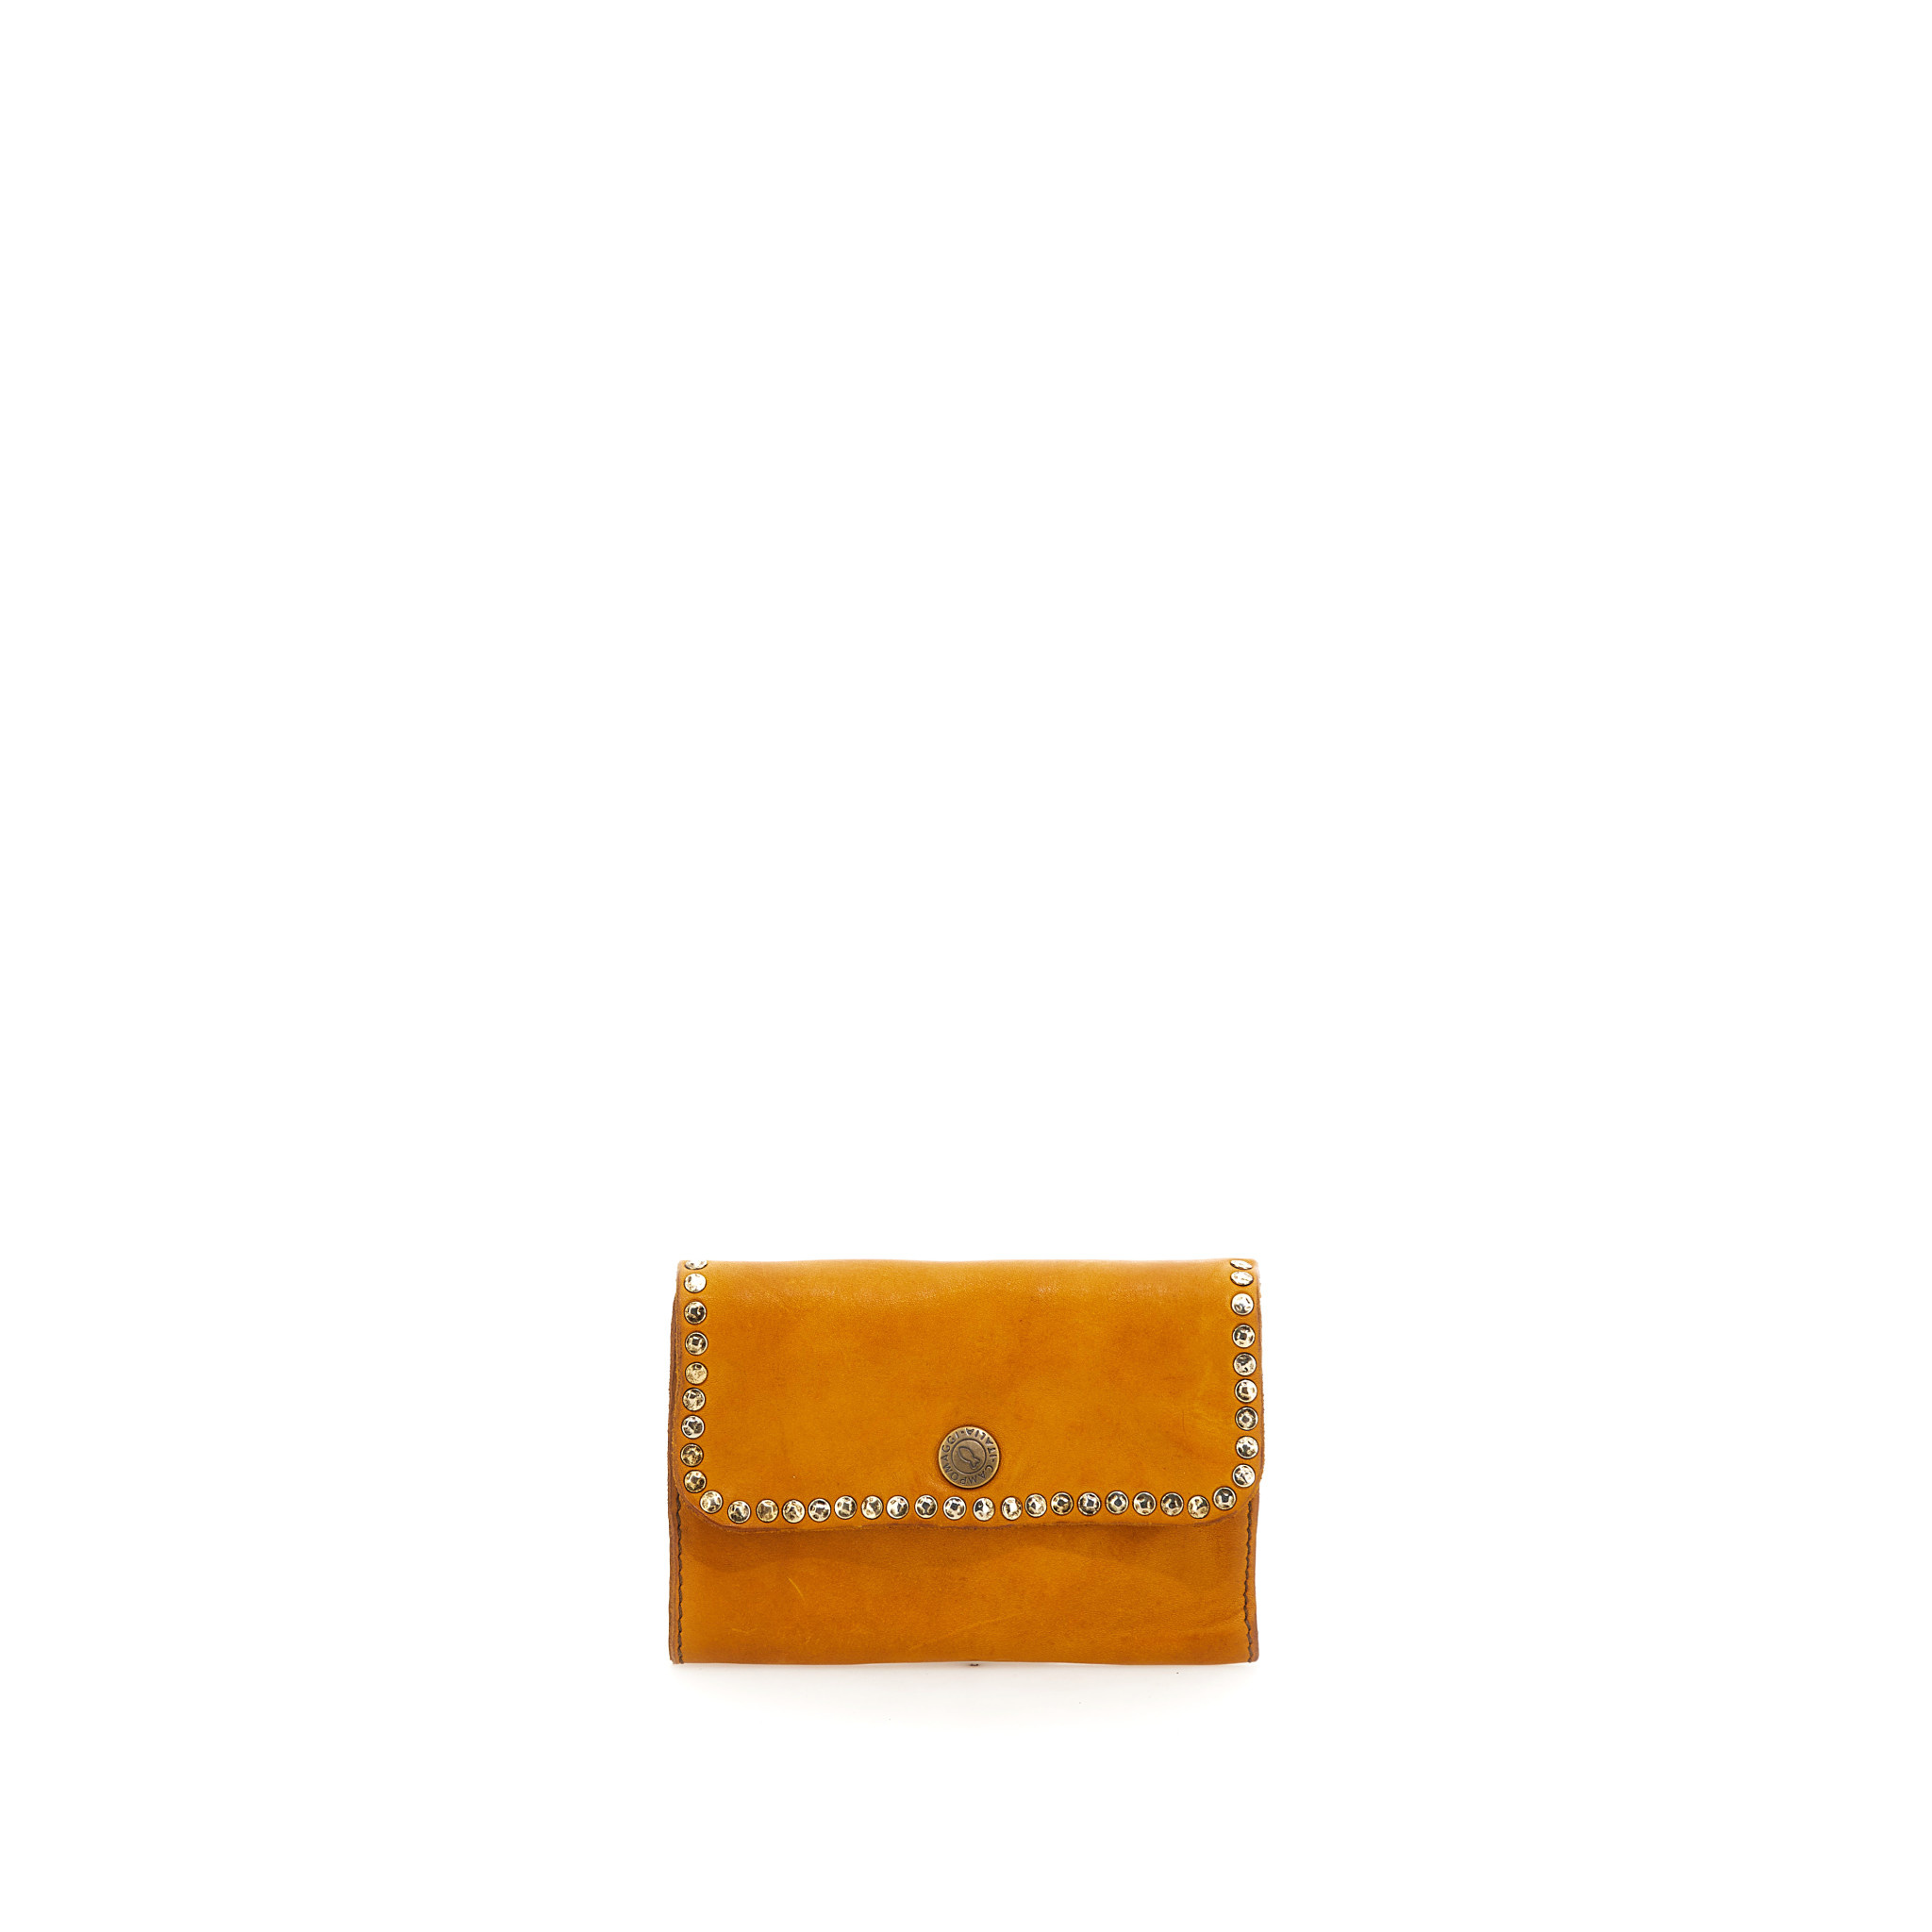 Campomaggi Wallet + Coin Purse. Leather + Studs. P/D Yellow